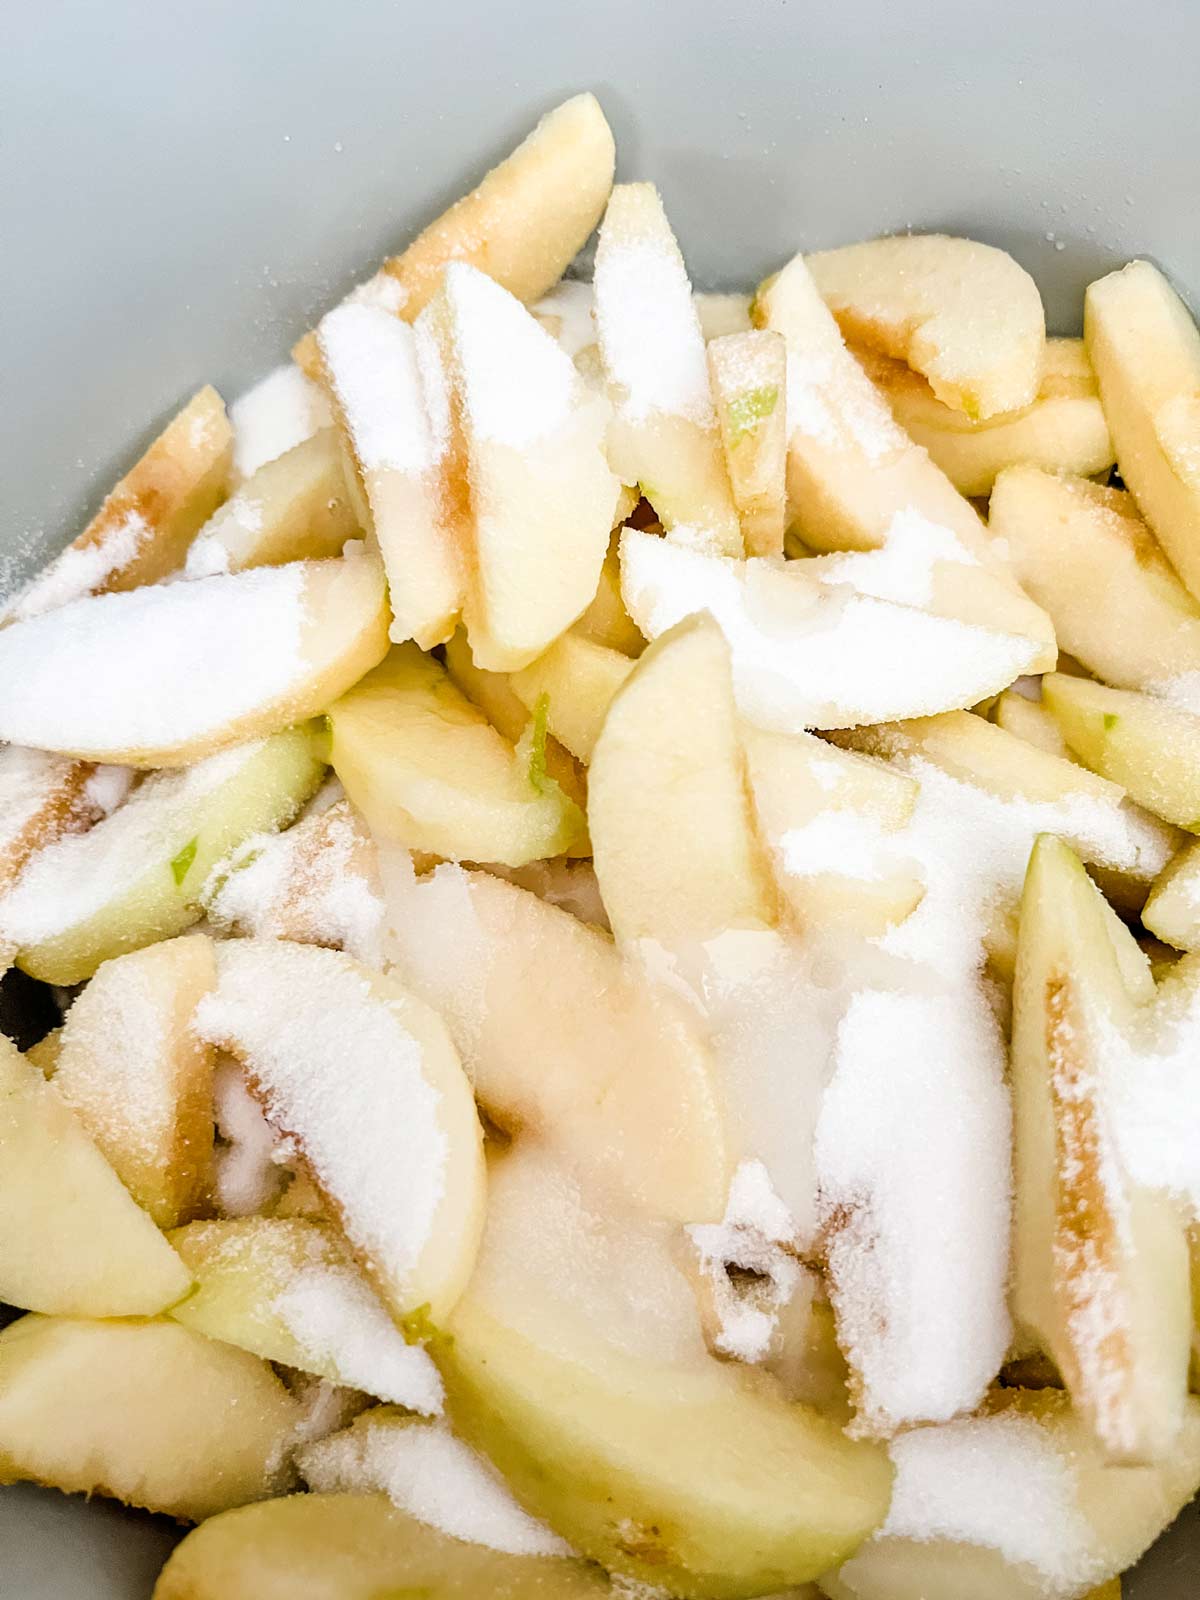 Photo of apples that have been coated and lemon juice and sprinkled with sugar being sauteed.